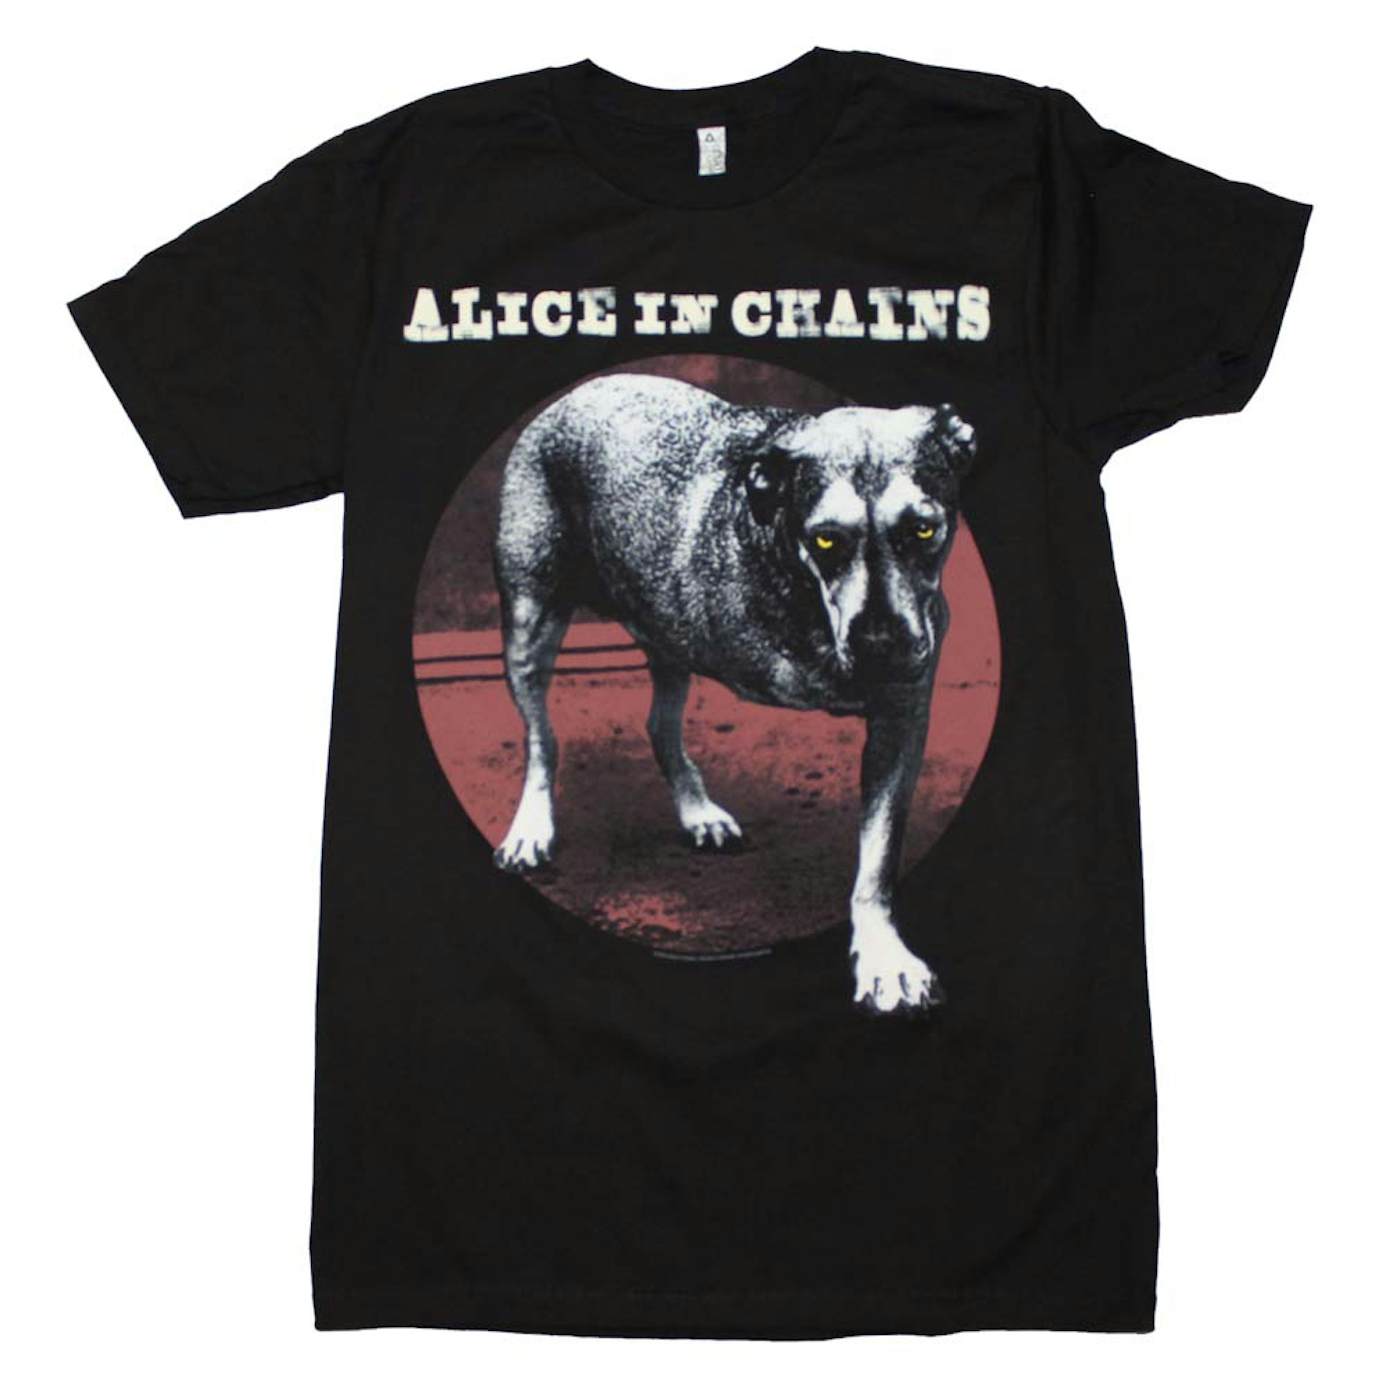 Alice in Chains T Shirt | Alice in Chains Self-Titled #2 Album T-Shirt